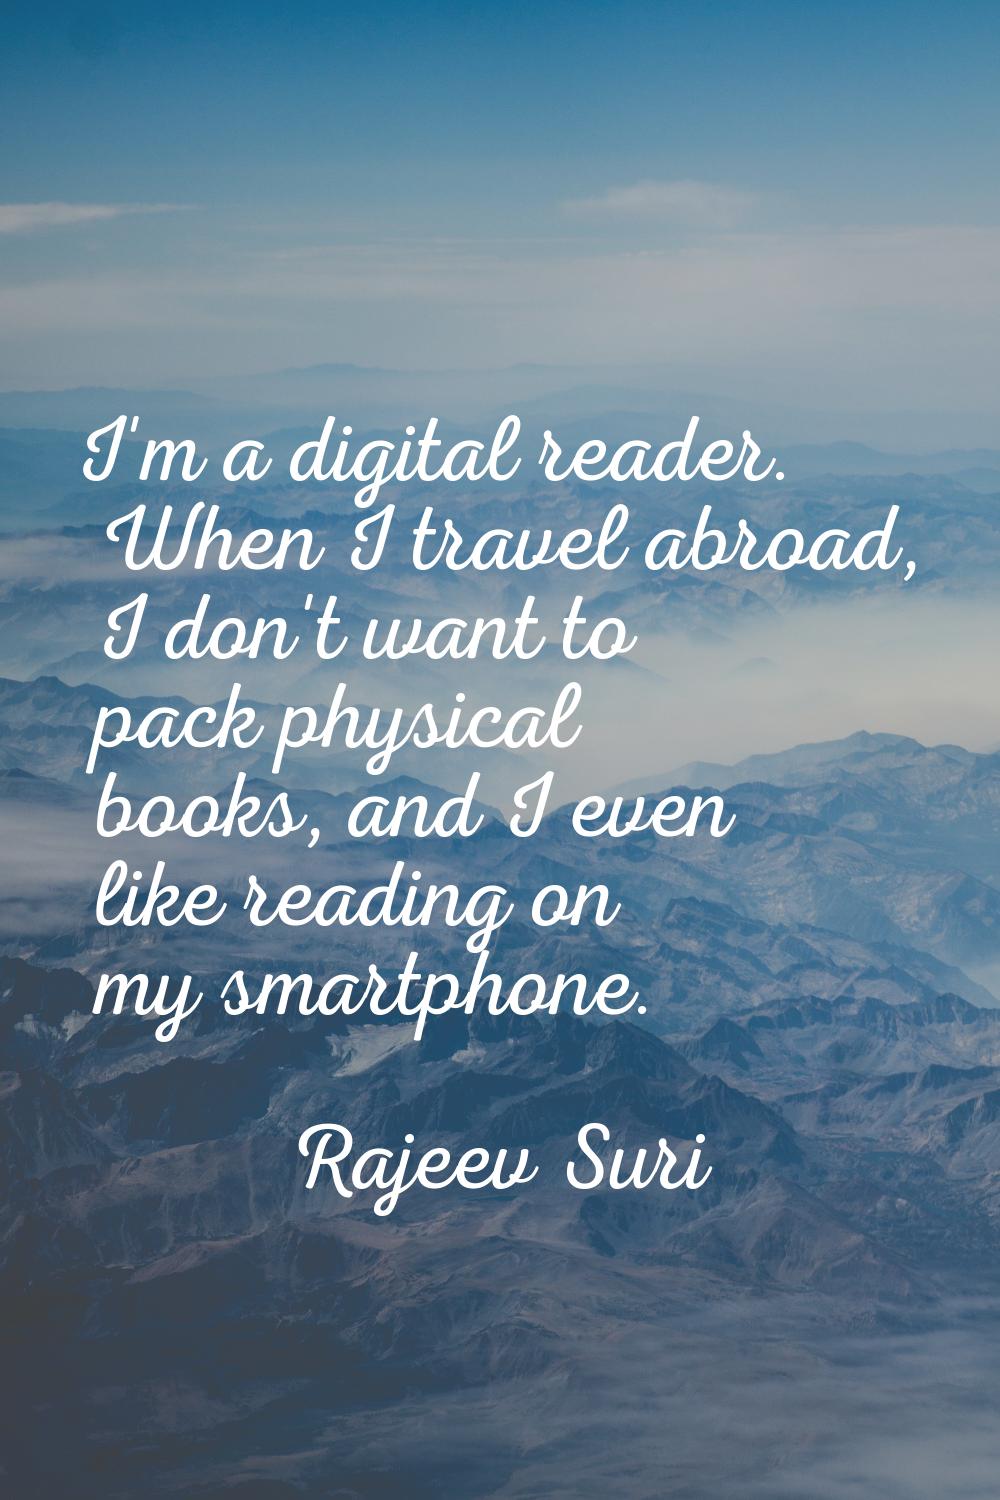 I'm a digital reader. When I travel abroad, I don't want to pack physical books, and I even like re